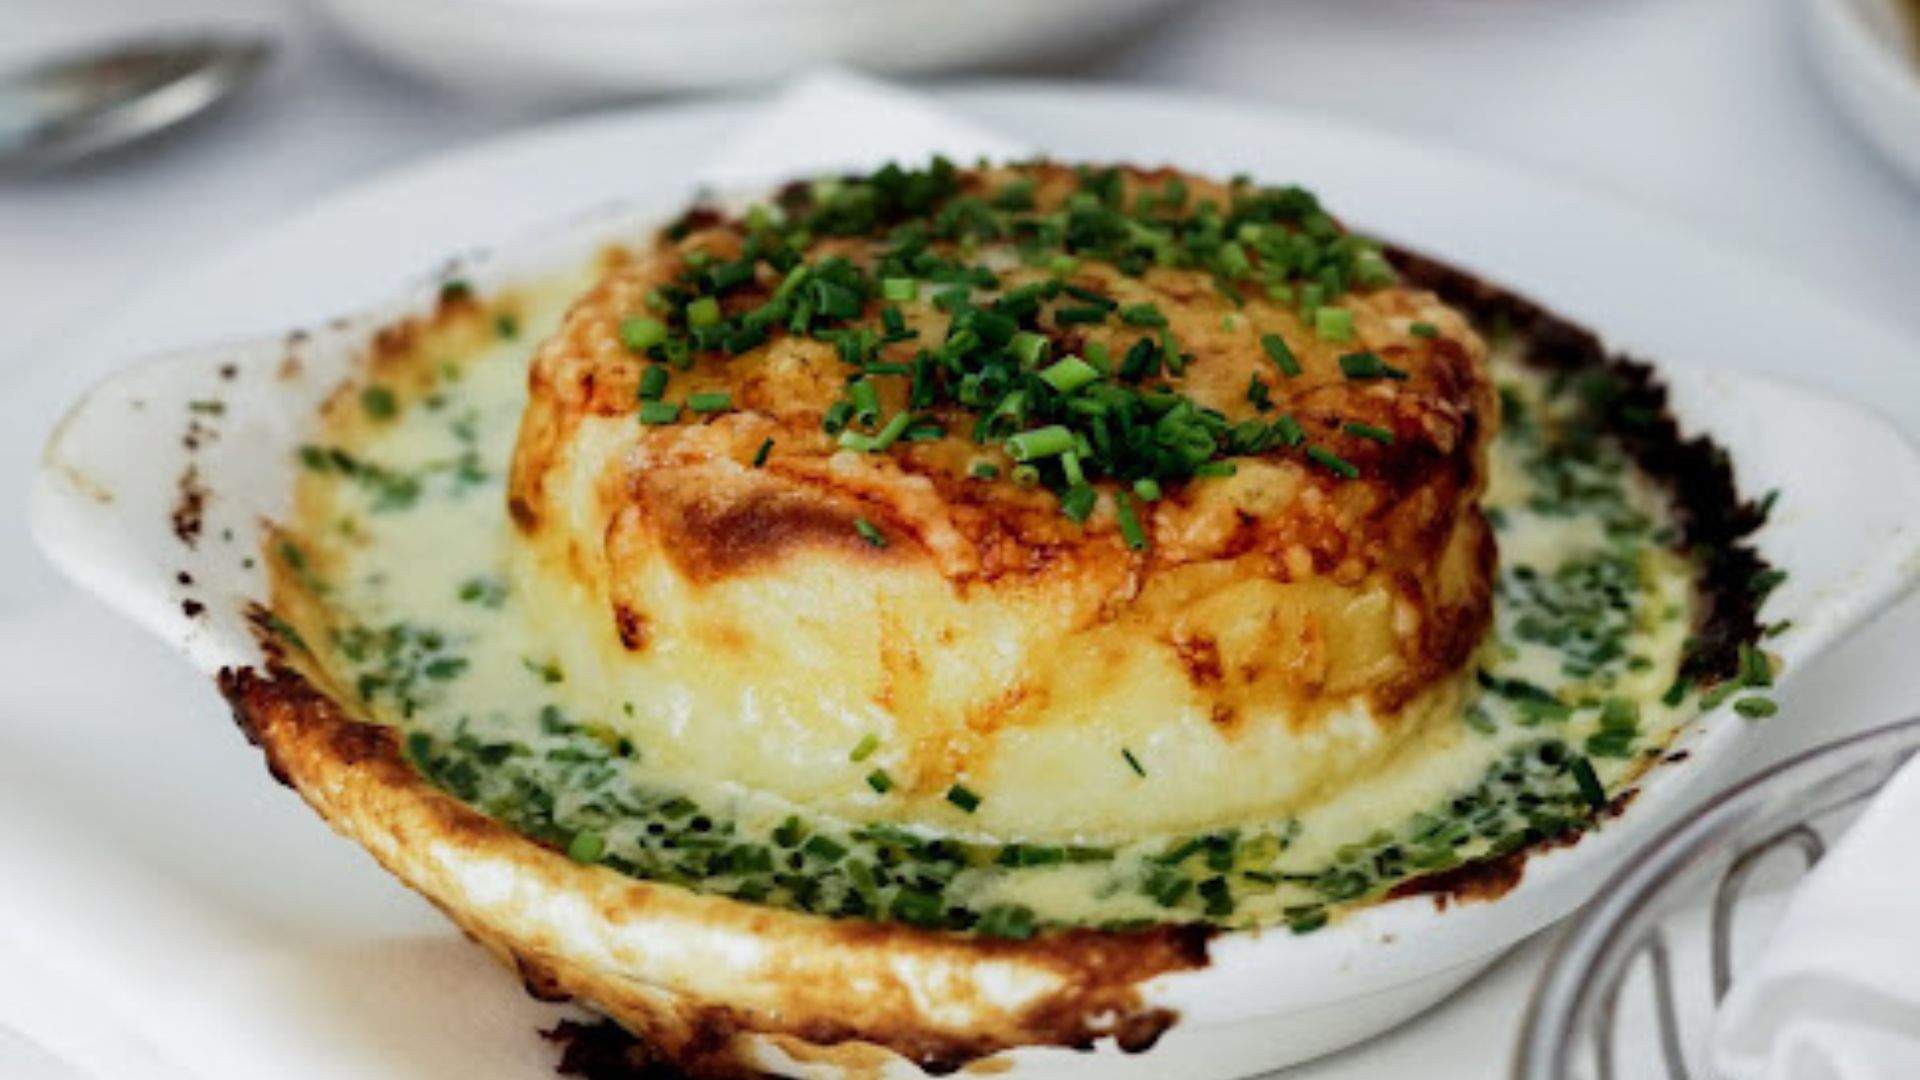 Macleay St Bistro new location with it's OG food: twice-baked French onion cheese souffle.